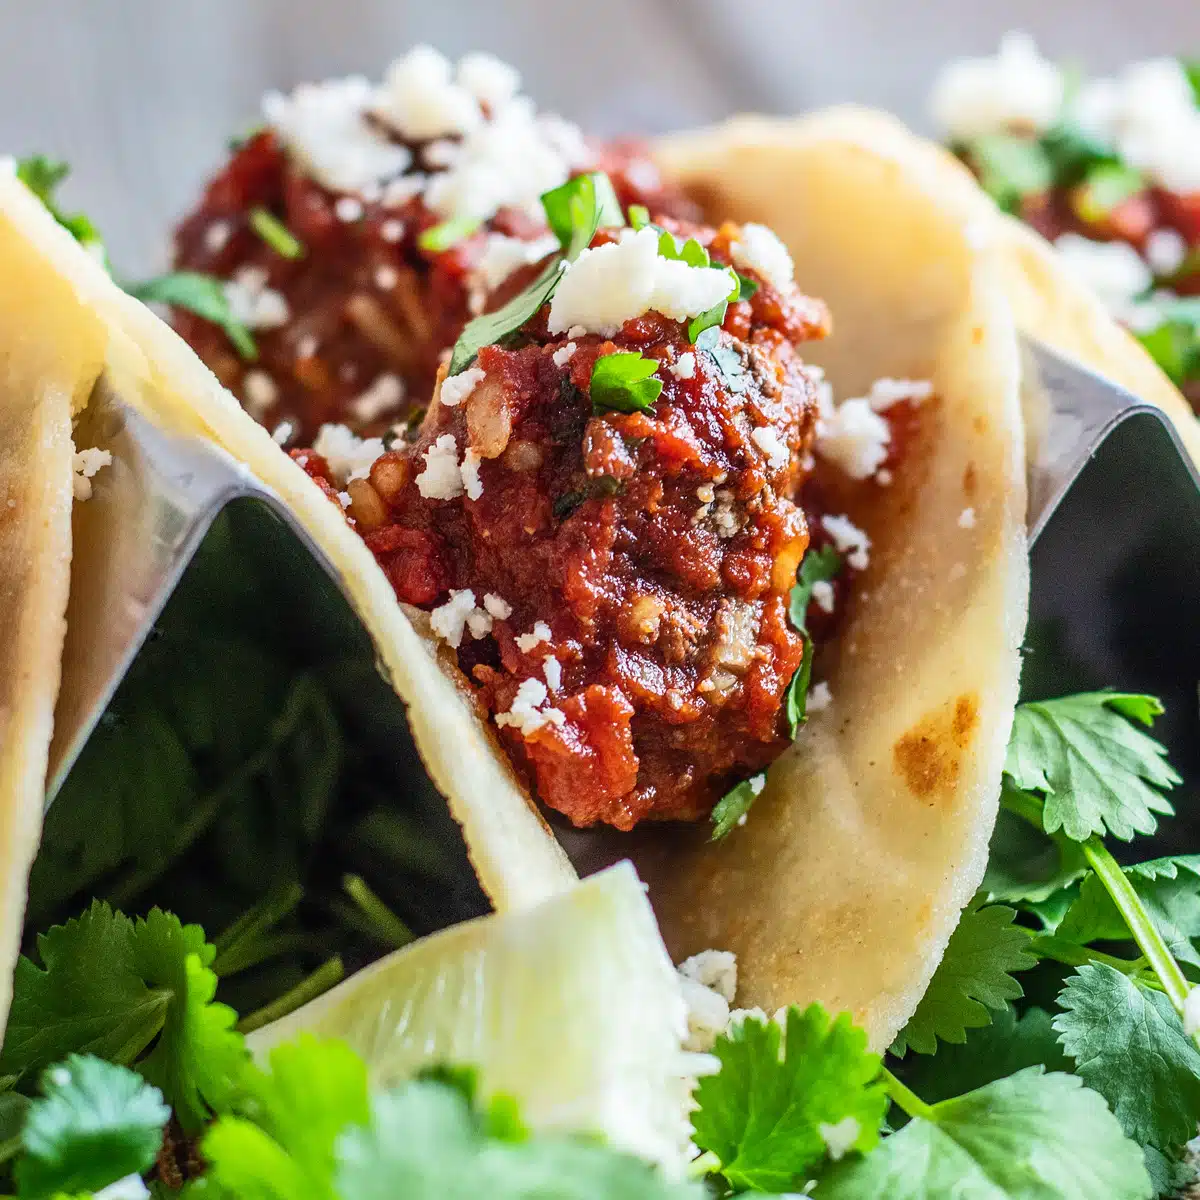 Best albondigas tacos recipe using hearty Mexican meatballs in a savory tomato and chipotle chili sauce.